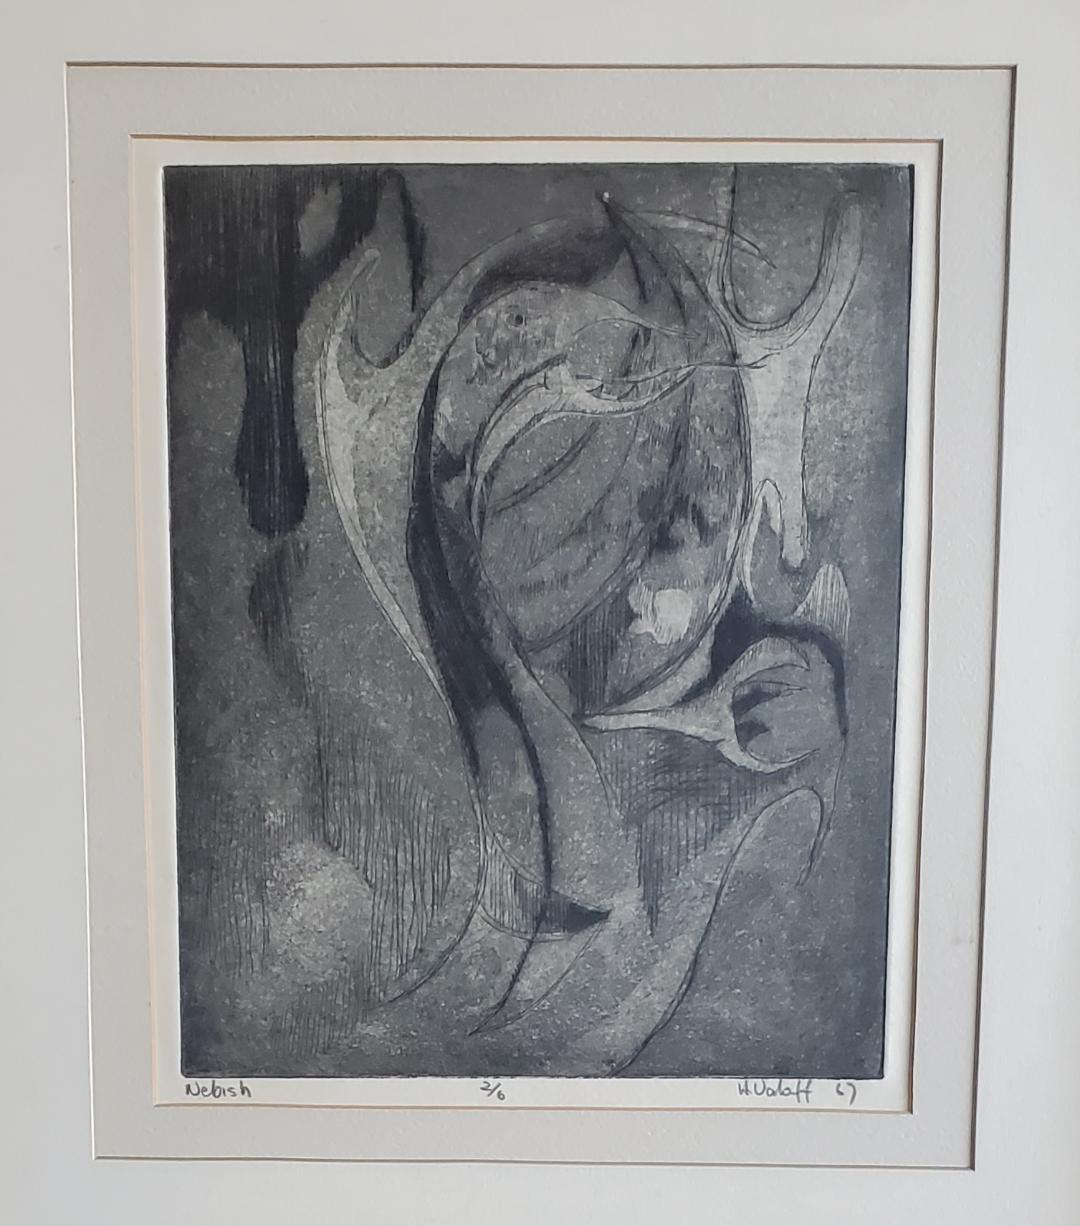 1967 Original Etching Title Date Signed Numbered 